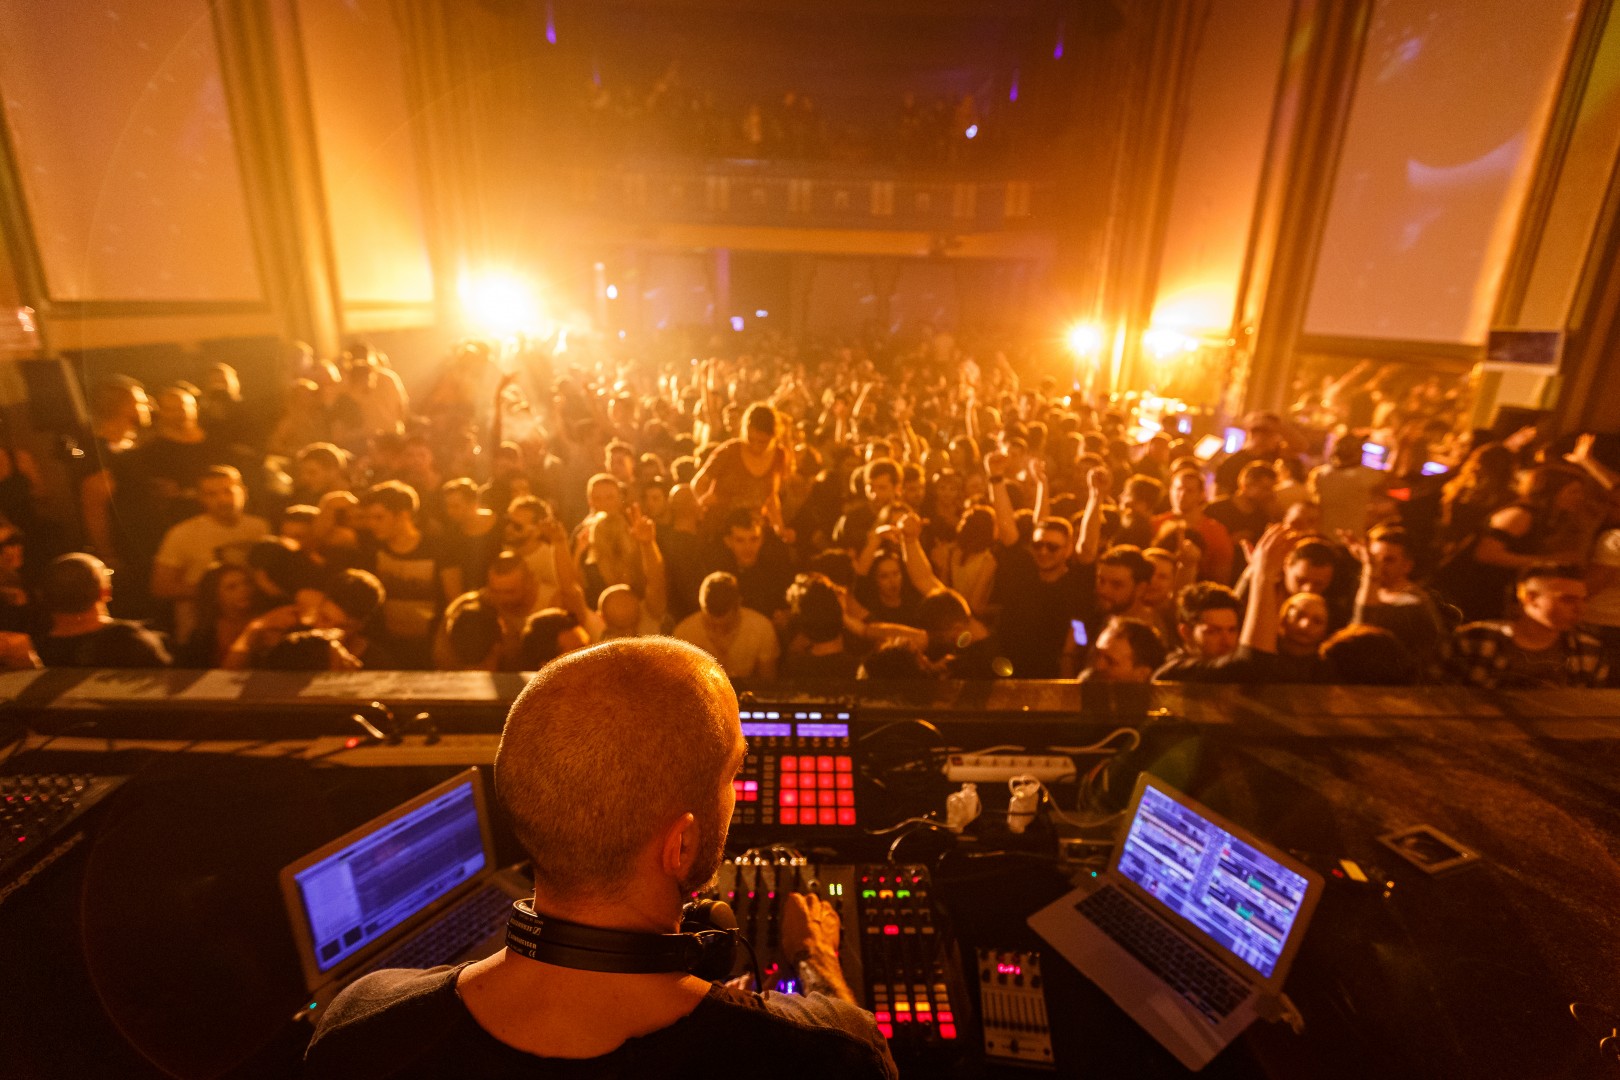 Chris Liebing at Kristal Club in Bucharest on February 20, 2016 (bf97e31666)